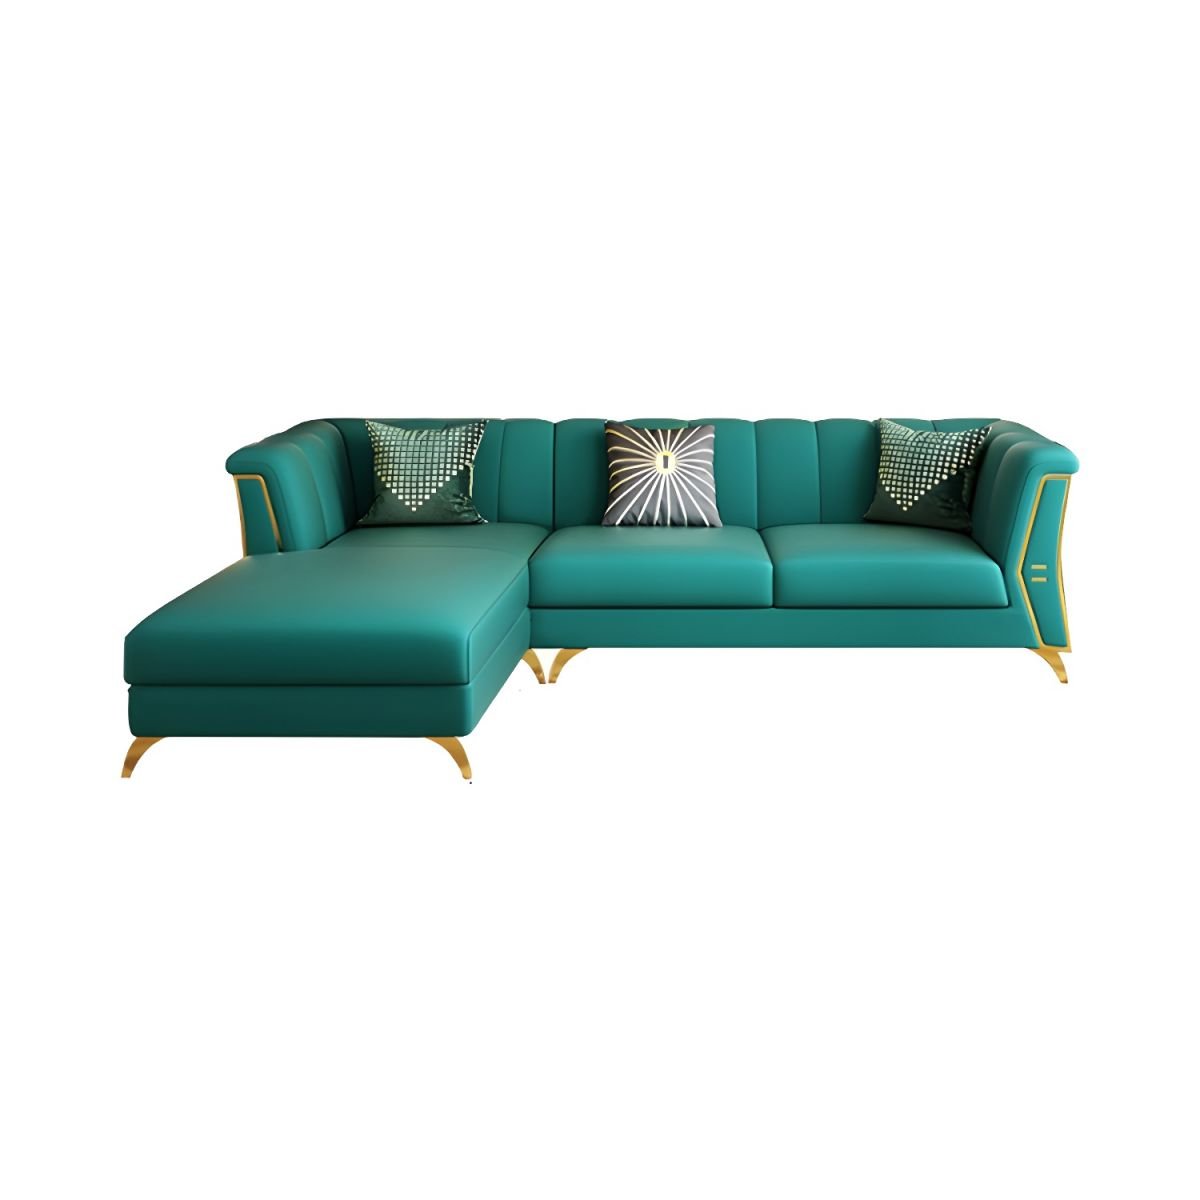 Glam Style Nappa Sectional Sofa with Brass Legs and Channel Back Design - 105.5"L x 71"W x 31"H Nappa Left